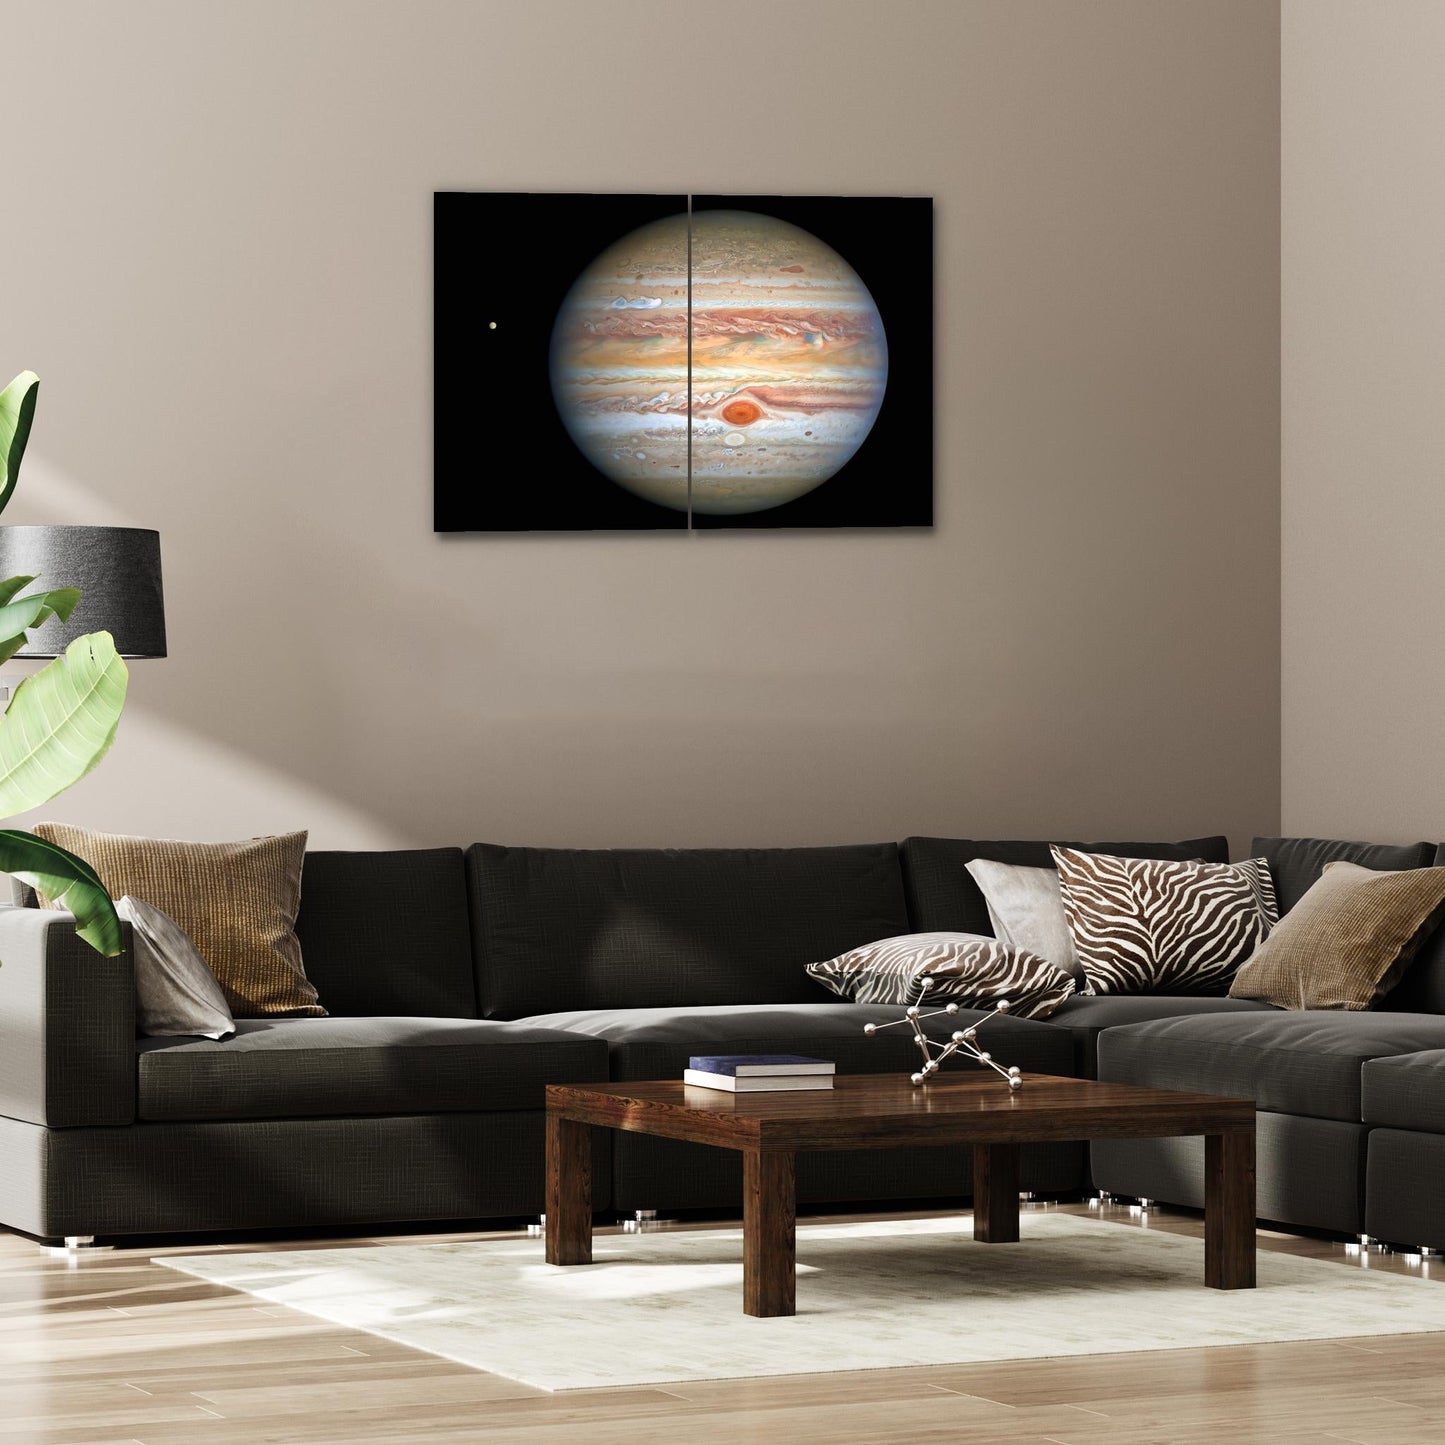 Jupiter and Europa: Celestial Pair - Atka Inspirations